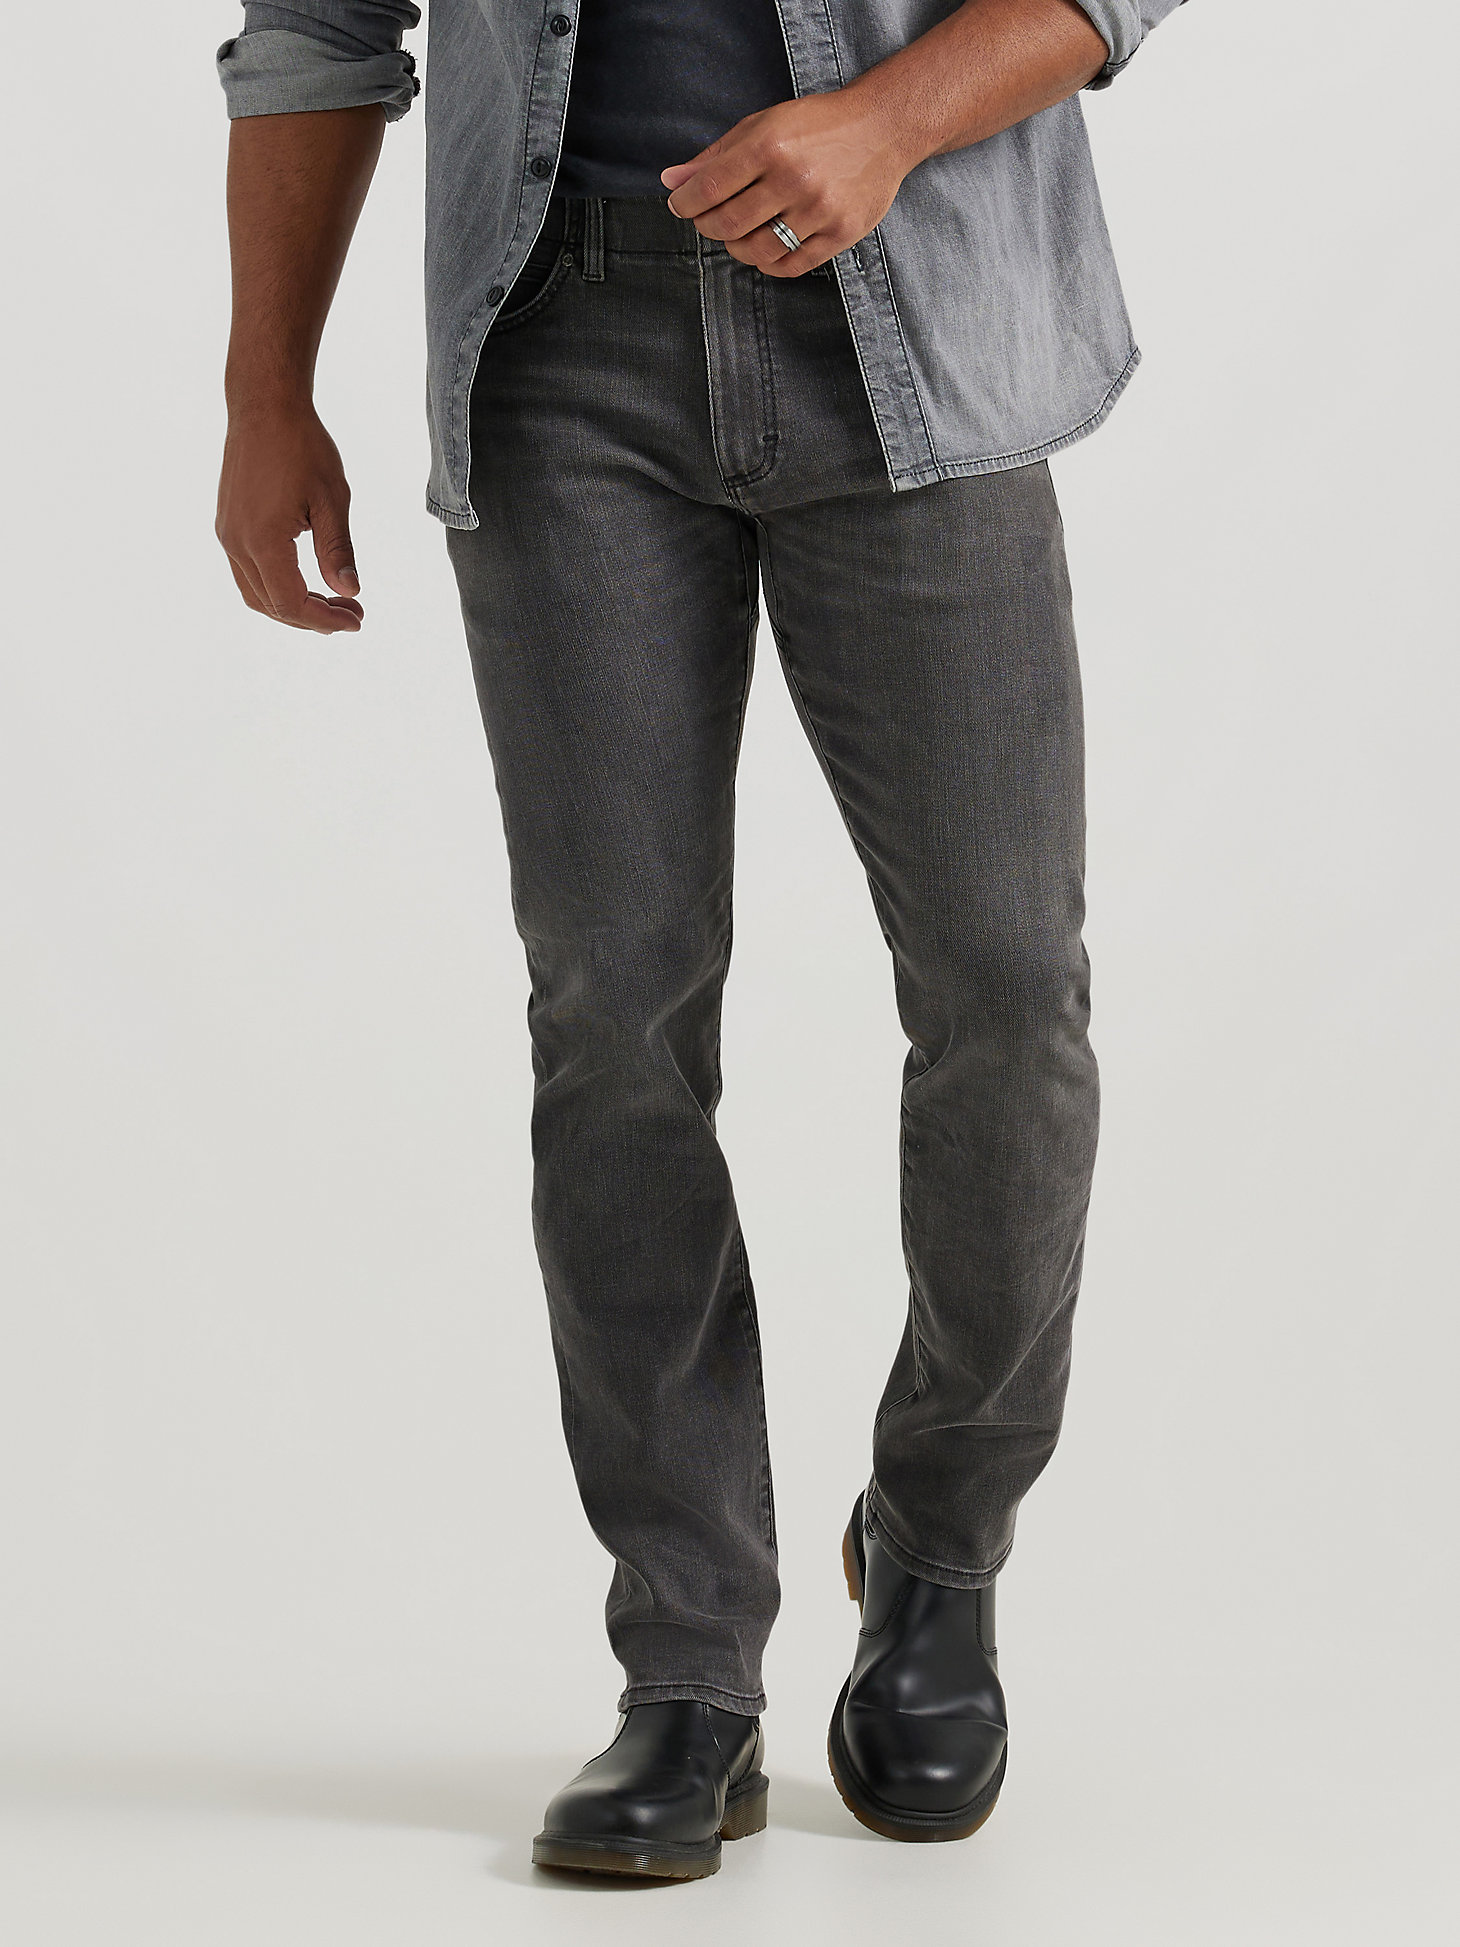 Men's Extreme Motion MVP Slim Fit Tapered Jean in Forge main view